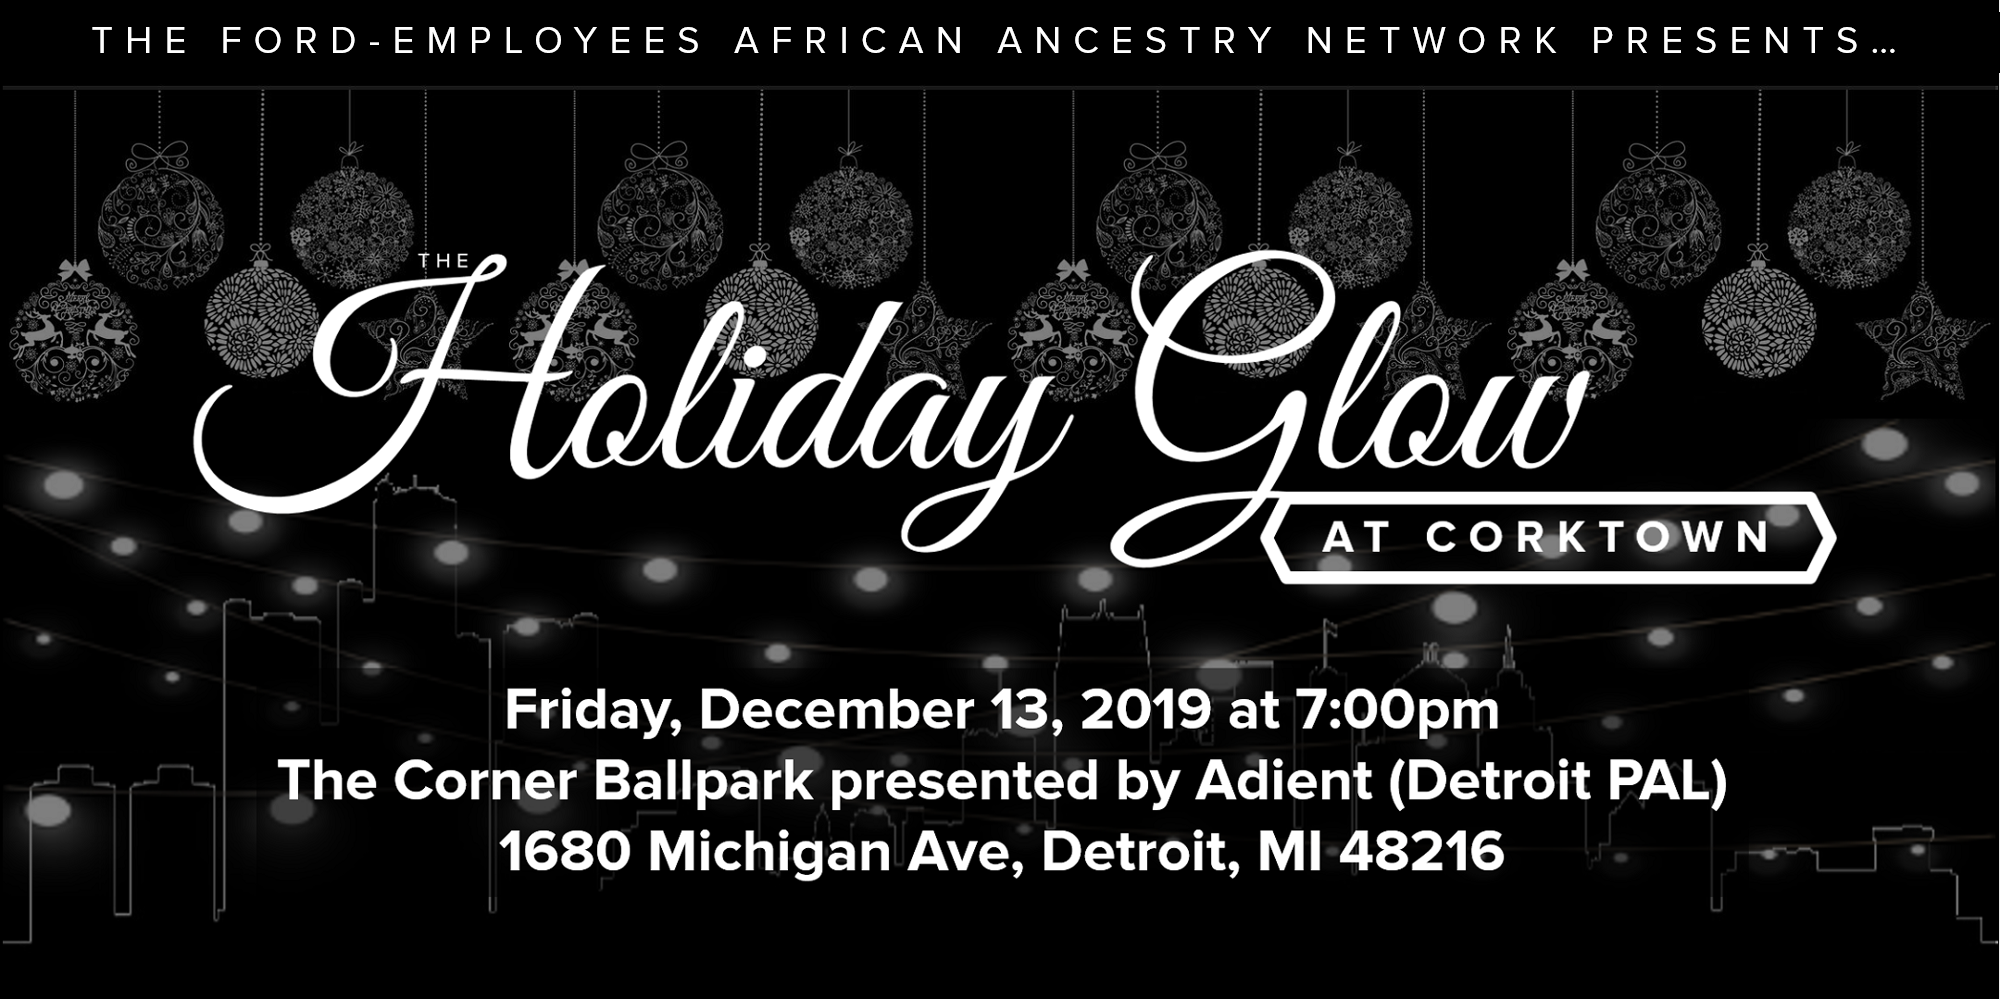 Ford African Ancestry Network (FAAN) 2019 Holiday Glow - Friday, December 13, 2019